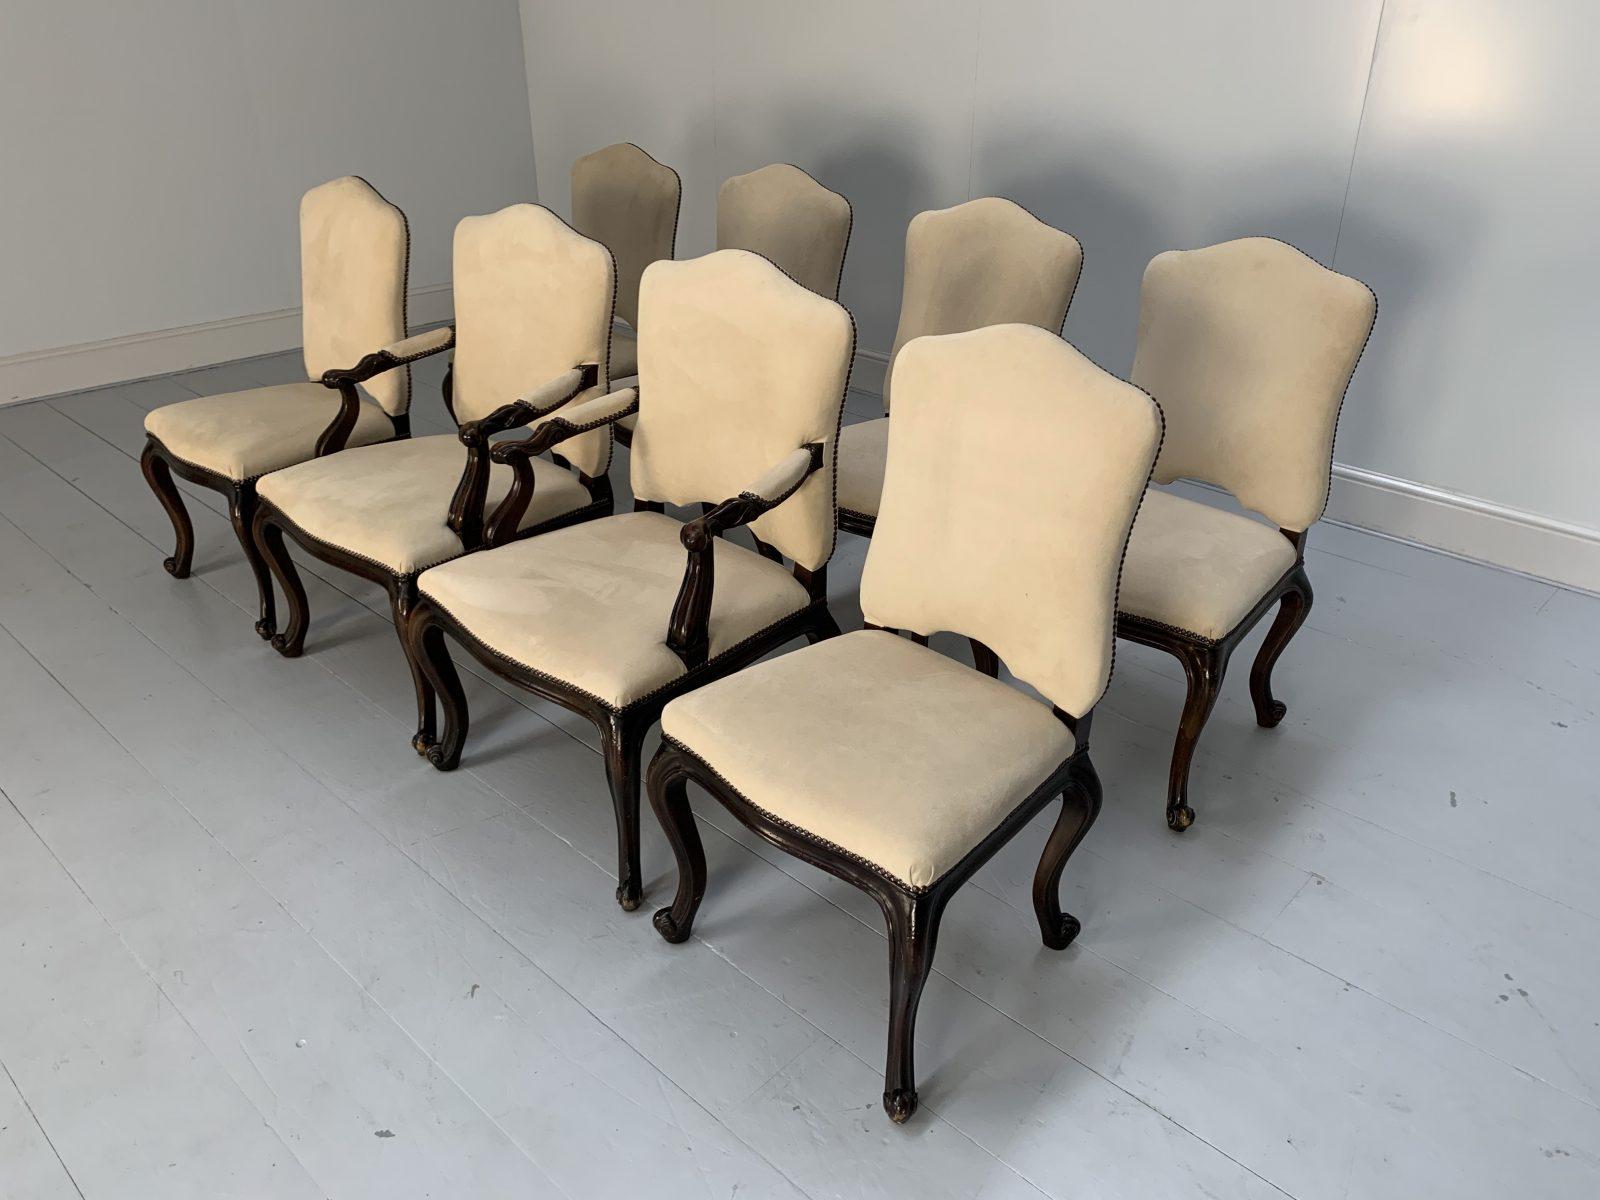 Suite of 8 Ralph Lauren “Noble Estate” Dining Chairs in Ivory Suede In Good Condition For Sale In Barrowford, GB